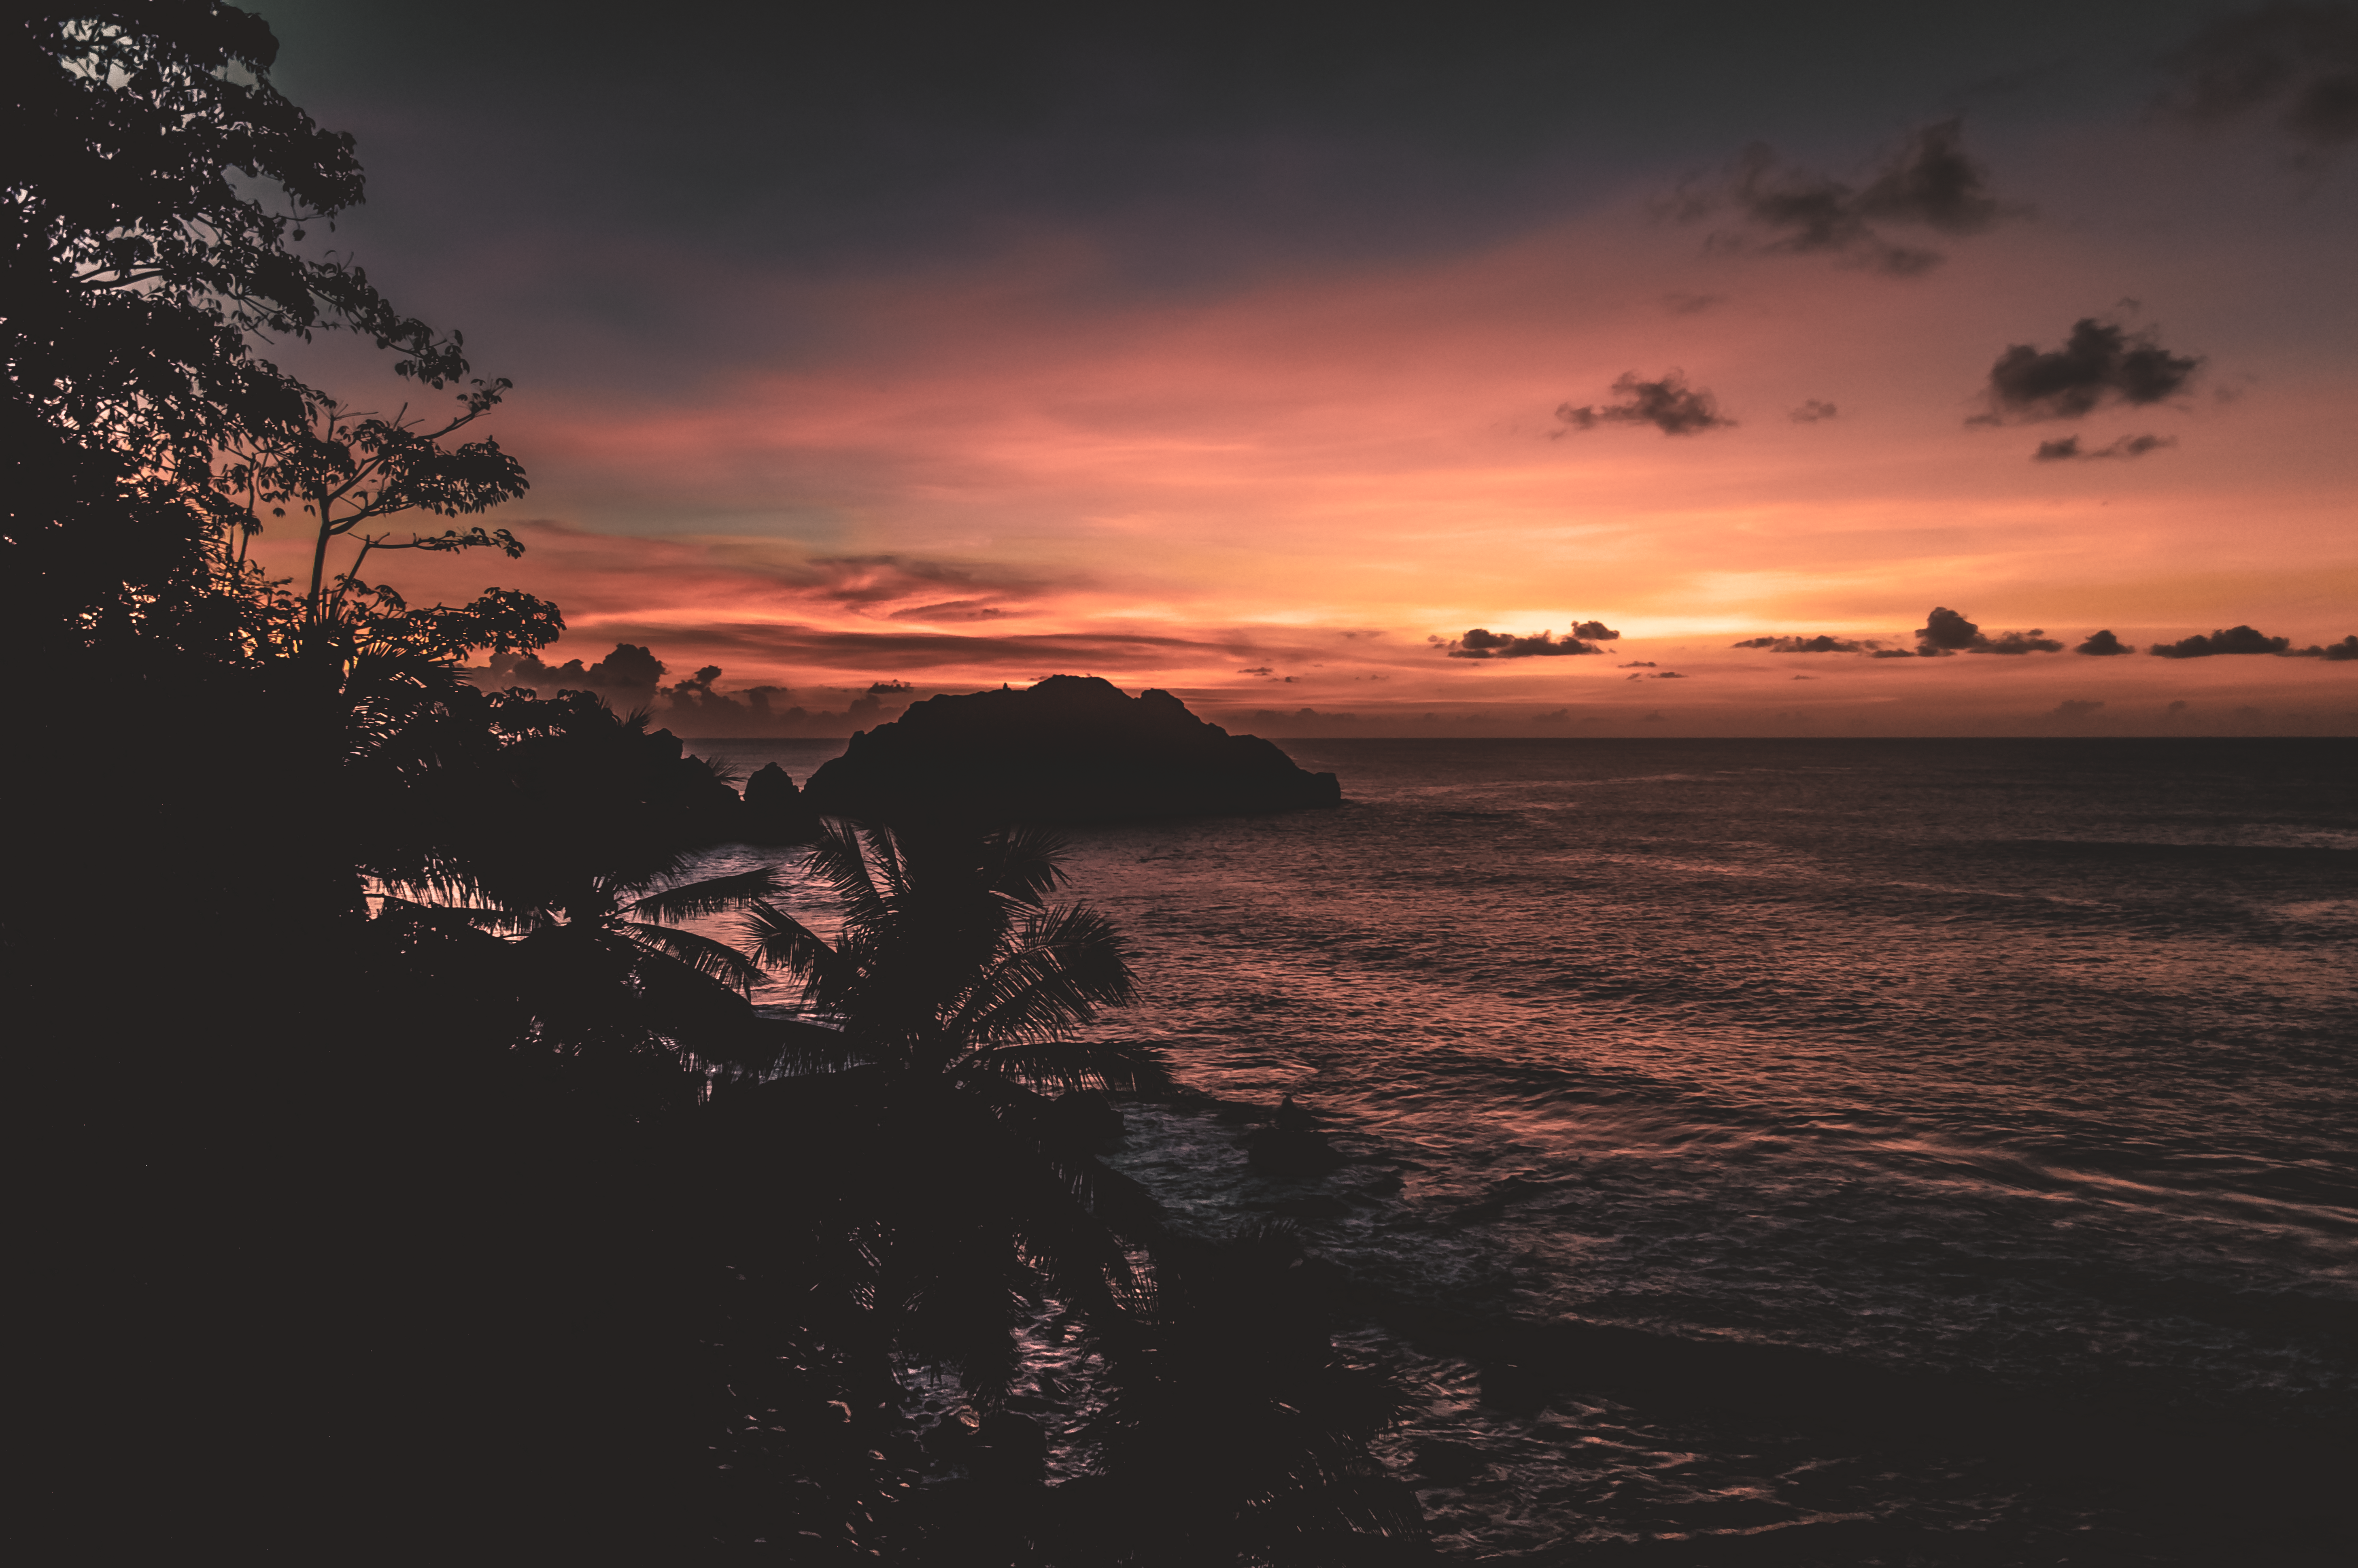 Cachorro beach's in Fernando de Noronha Brazil. One of the most beautiful sunsets I've ever seen For more photos checkout: https://www.instagram.com/alexswbraga/